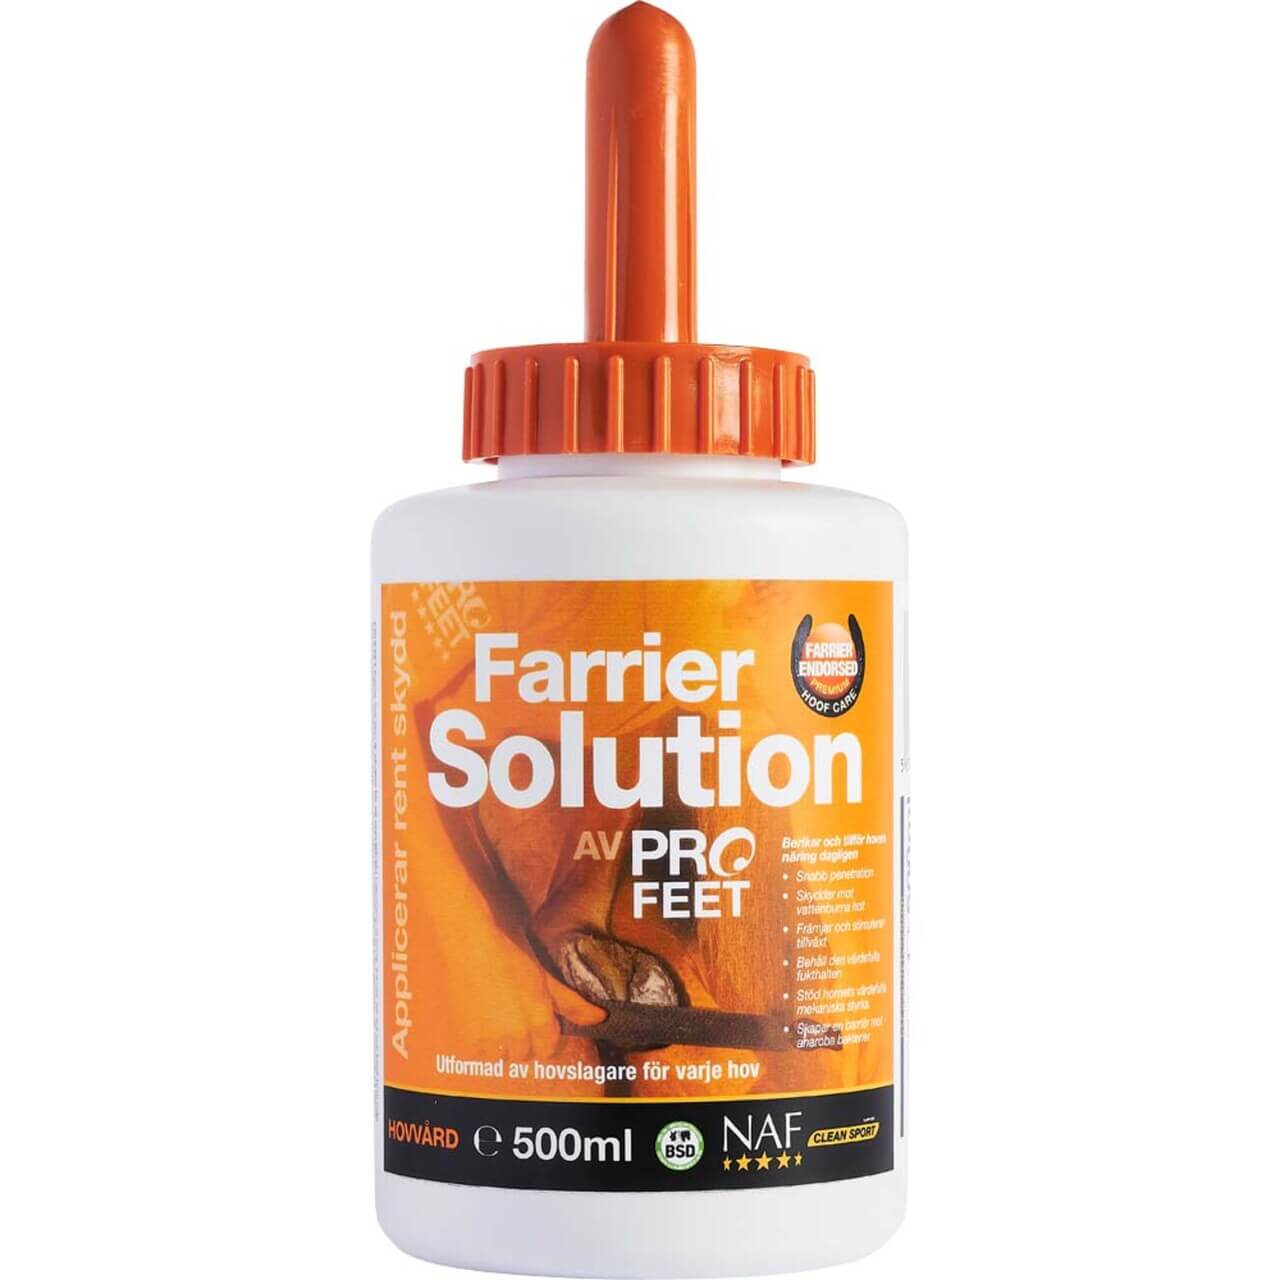 Farrier Solution by ProFeet